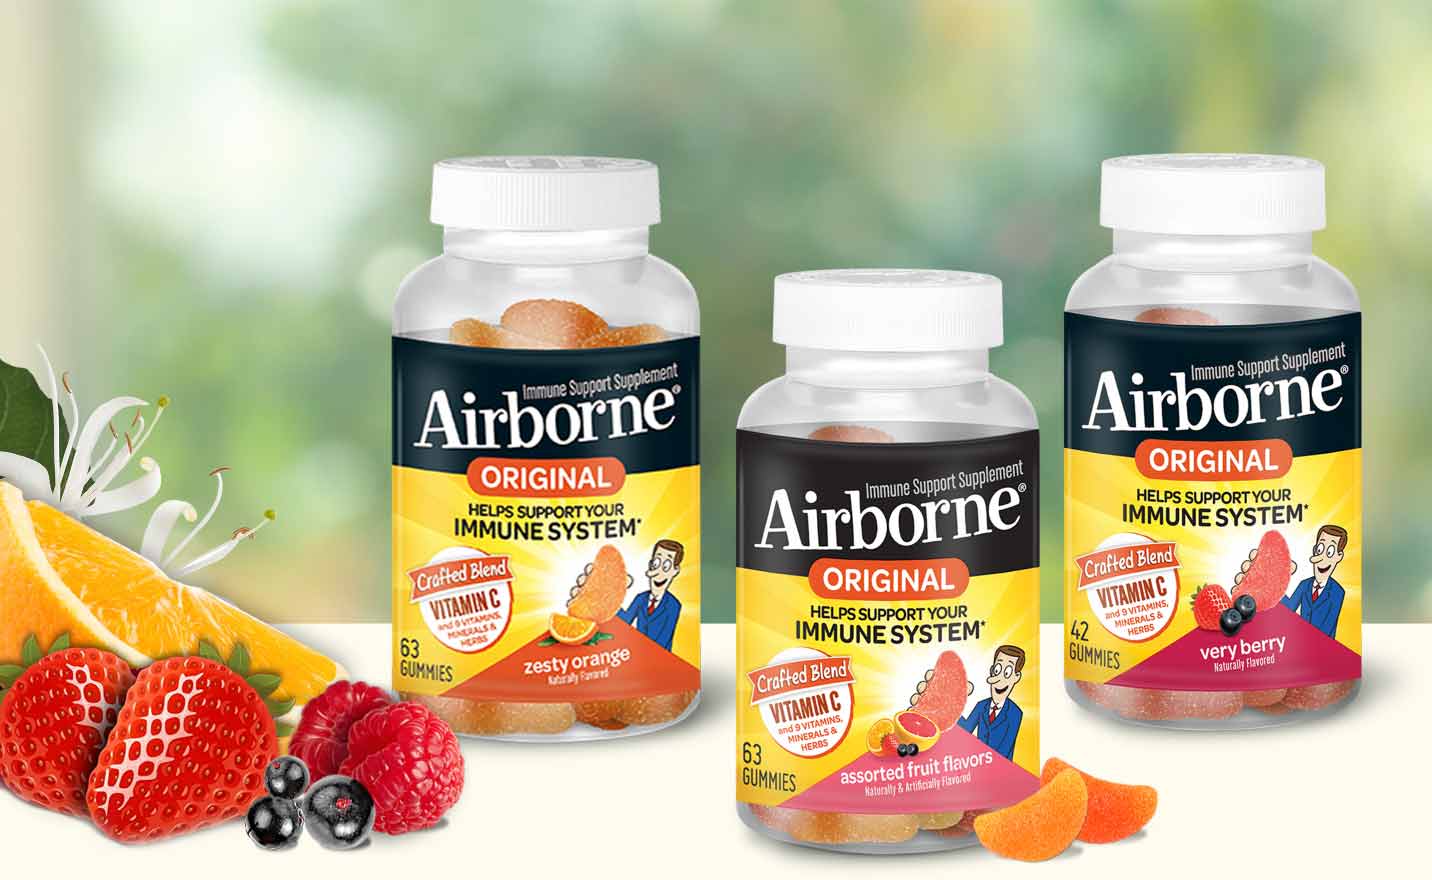 Airborne gummies come in a range of fruit flavors